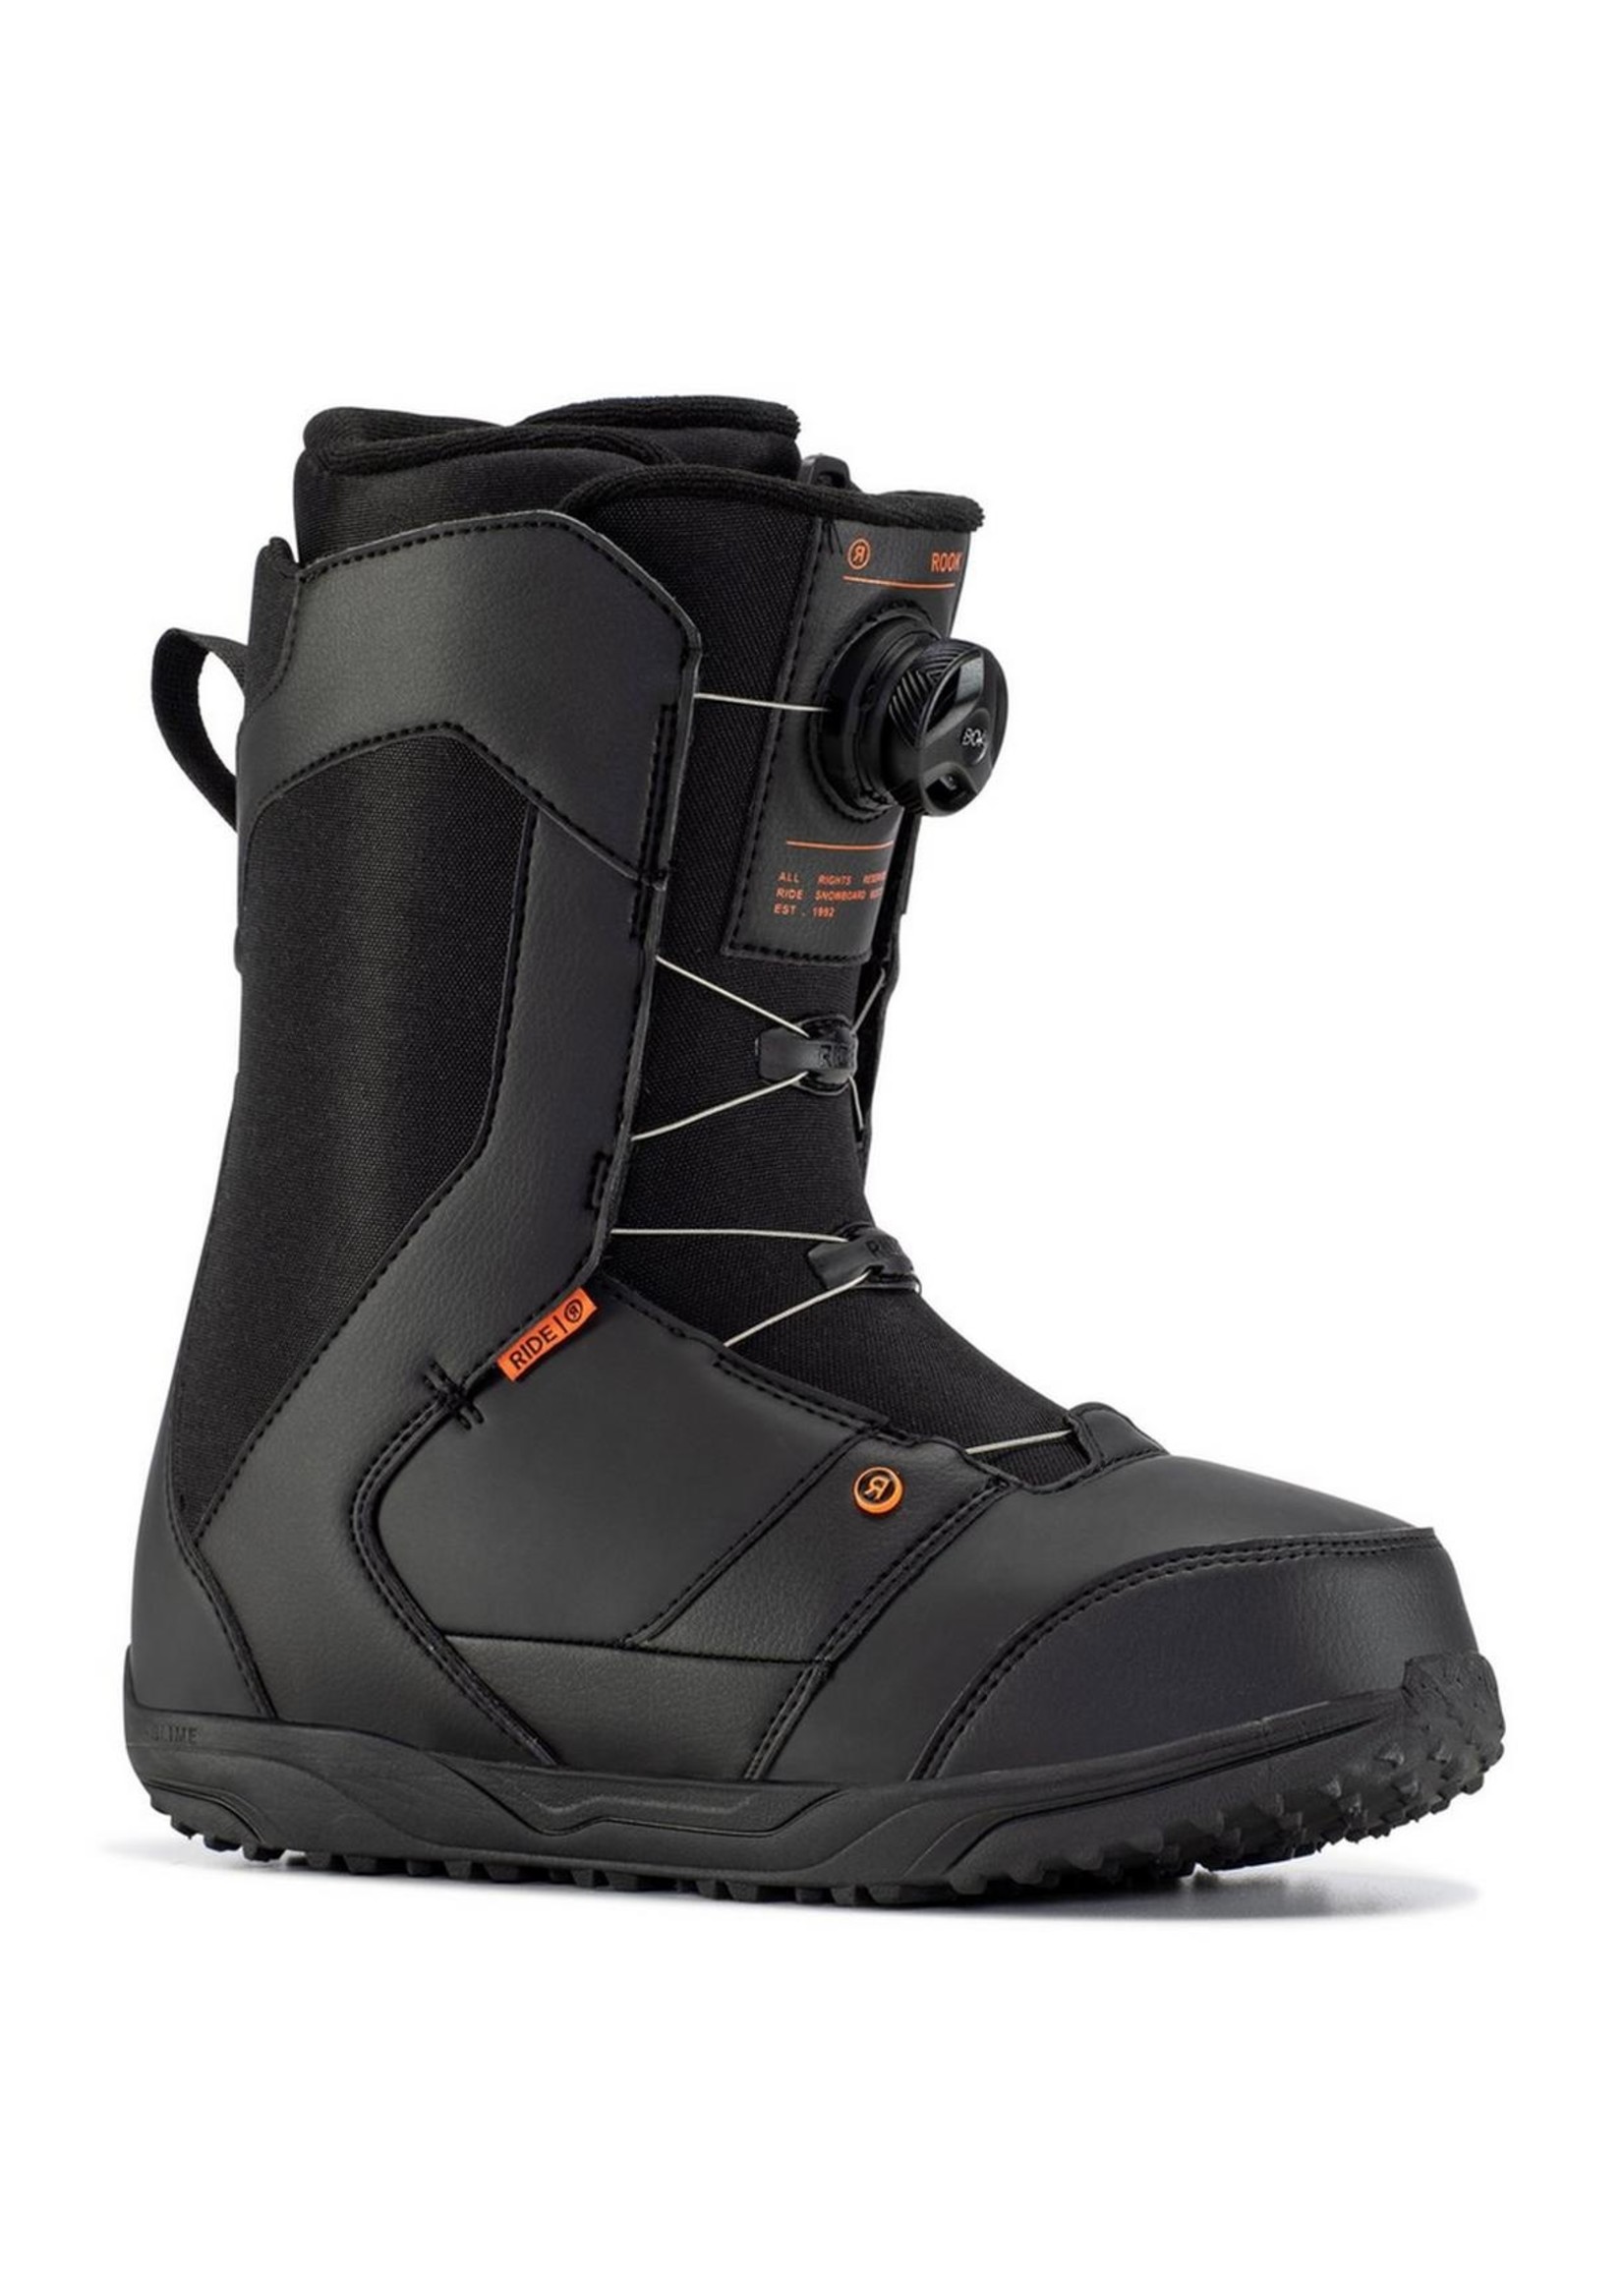 RIDE SNOWBOARDS 2021 Ride Rook Mns Board Boots: BLk